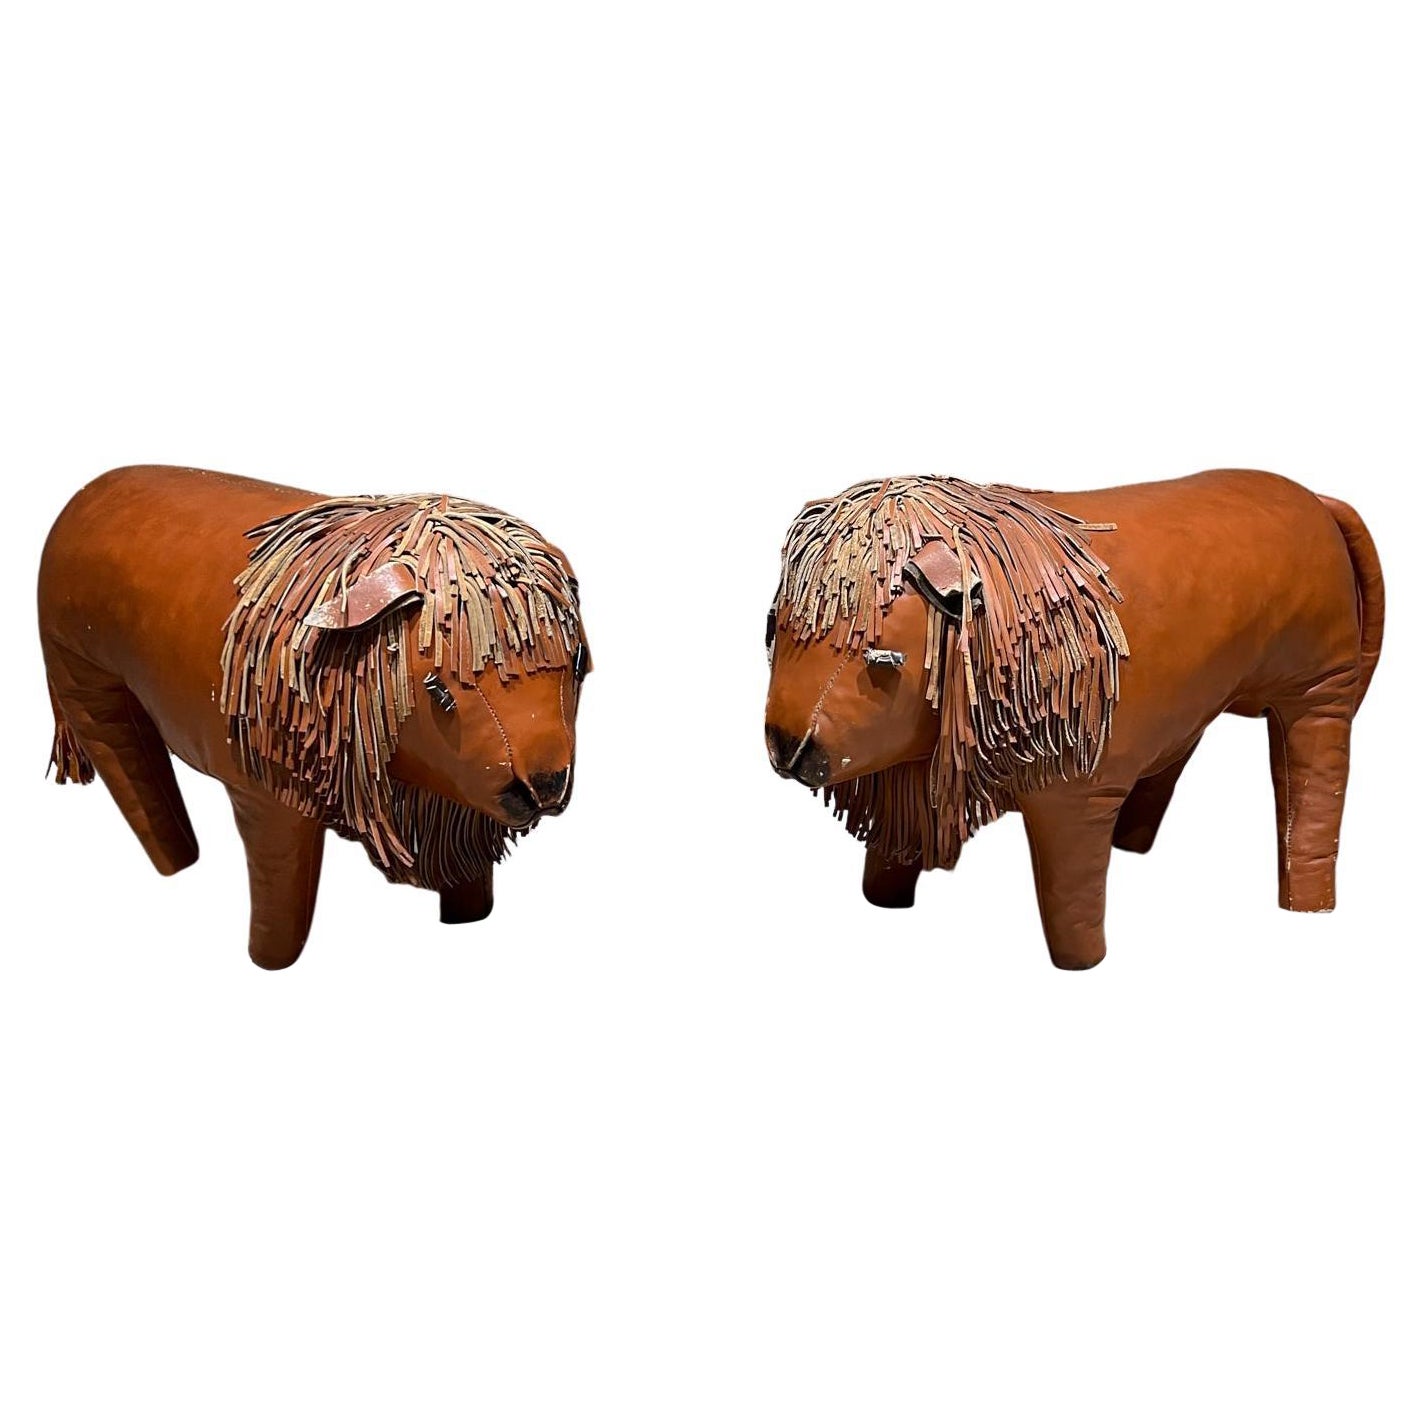  Leather Lion Footstools Style of Dimitri Omersa for Abercrombie & Fitch